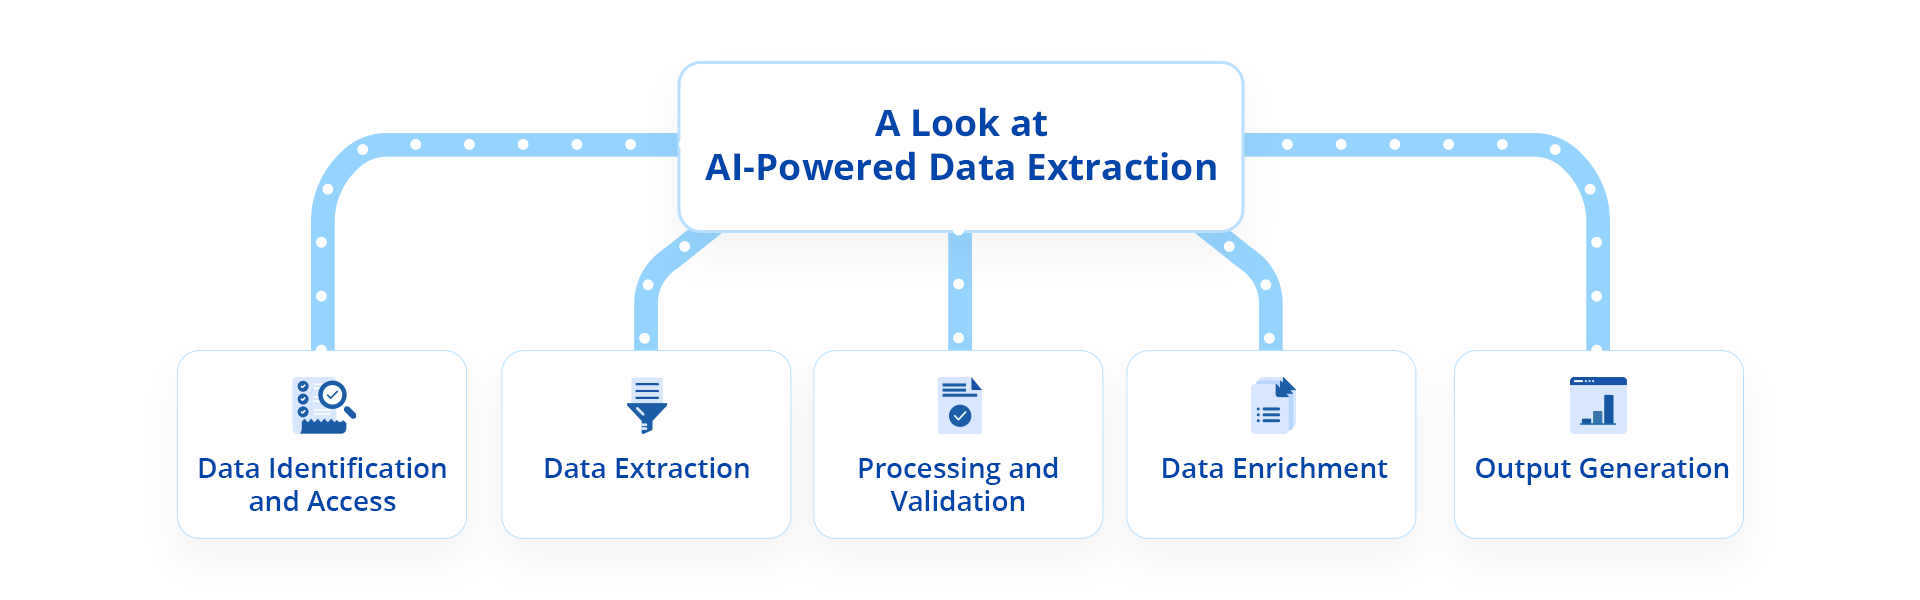 An image describing how AI-powered data extraction works